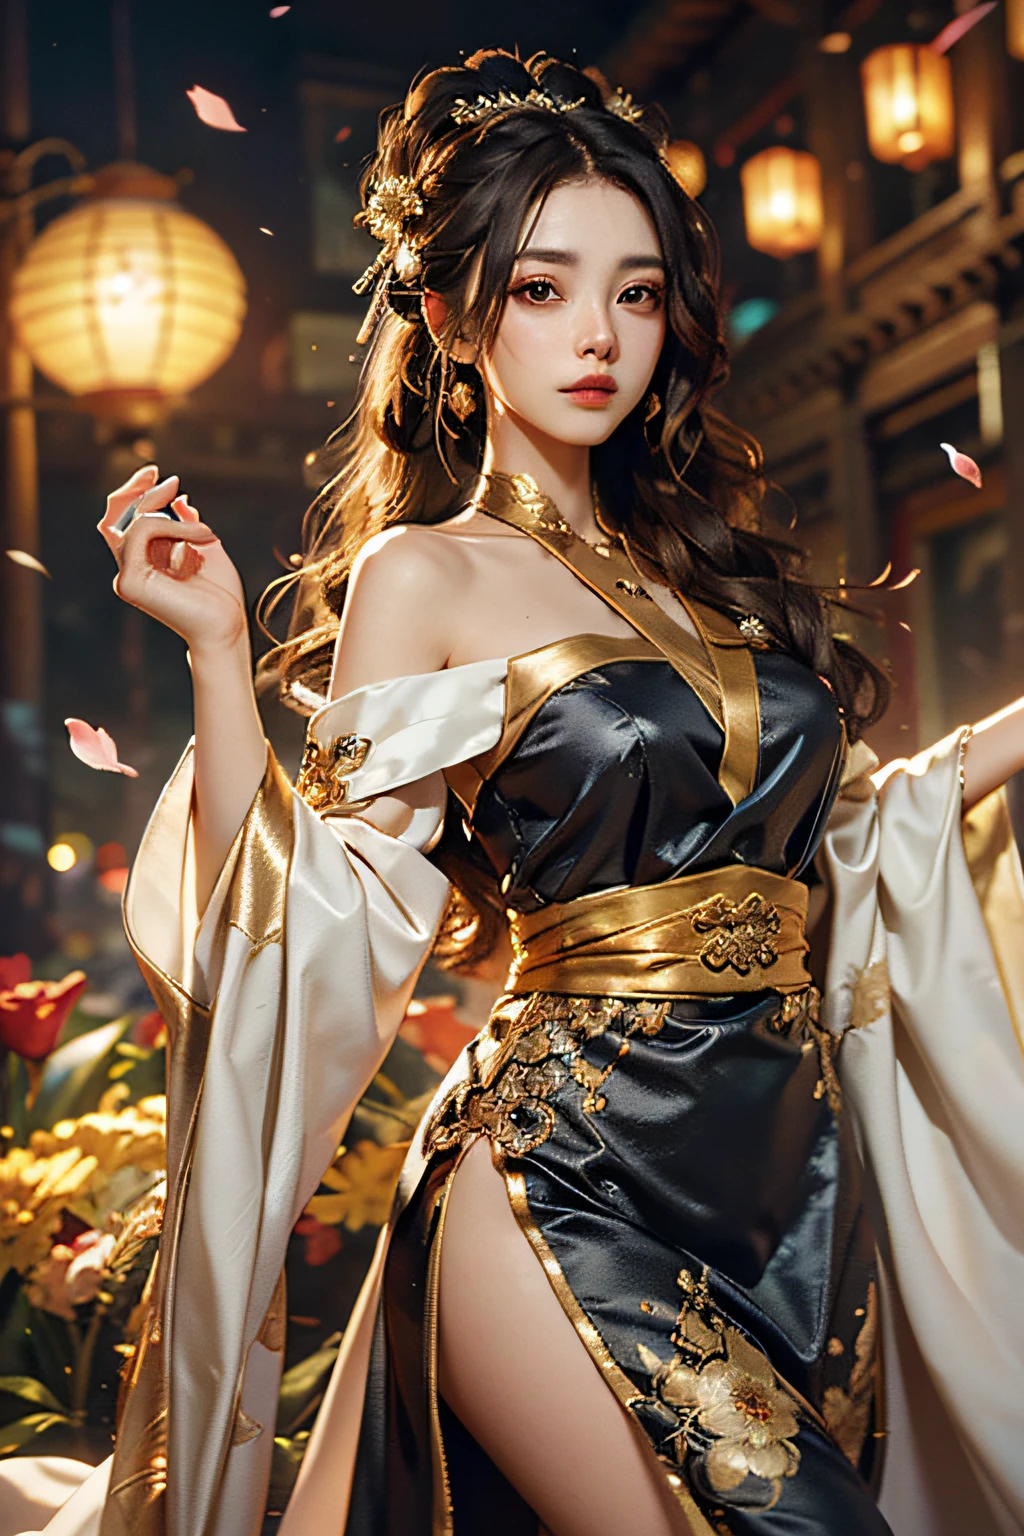 Superb Quality, Masterpiece, High Resolution, (Exquisite Body: 1.5), Beauty, Bare Shoulders, Extra Large Breasts (2.5) Wide Buttocks, Thin Waist, Stunning Beauty, (Milky Skin: 1.3), Exquisite Details, High Resolution, Wallpaper, 1 Woman, Solo, Dress, Hair Accessories, (((Golden Black Dress)) ), Flower, Long Hair, Brown Hair, Shut Up, Accessories, Long Sleeves, Raised Hands, Wide Sleeves, Big Eyes, Flowing Hair, Hanfu, Hanfu, Embroidery, Long Dress, Natural Pose, Falling Petals, Indoor, Fanning, Lantern, 16K, HDR, High resolution, depth of field, (film grain: 1.1), Bocon, prime time, (lens flare), vignetting, rainbow, (color grading: 1.5)